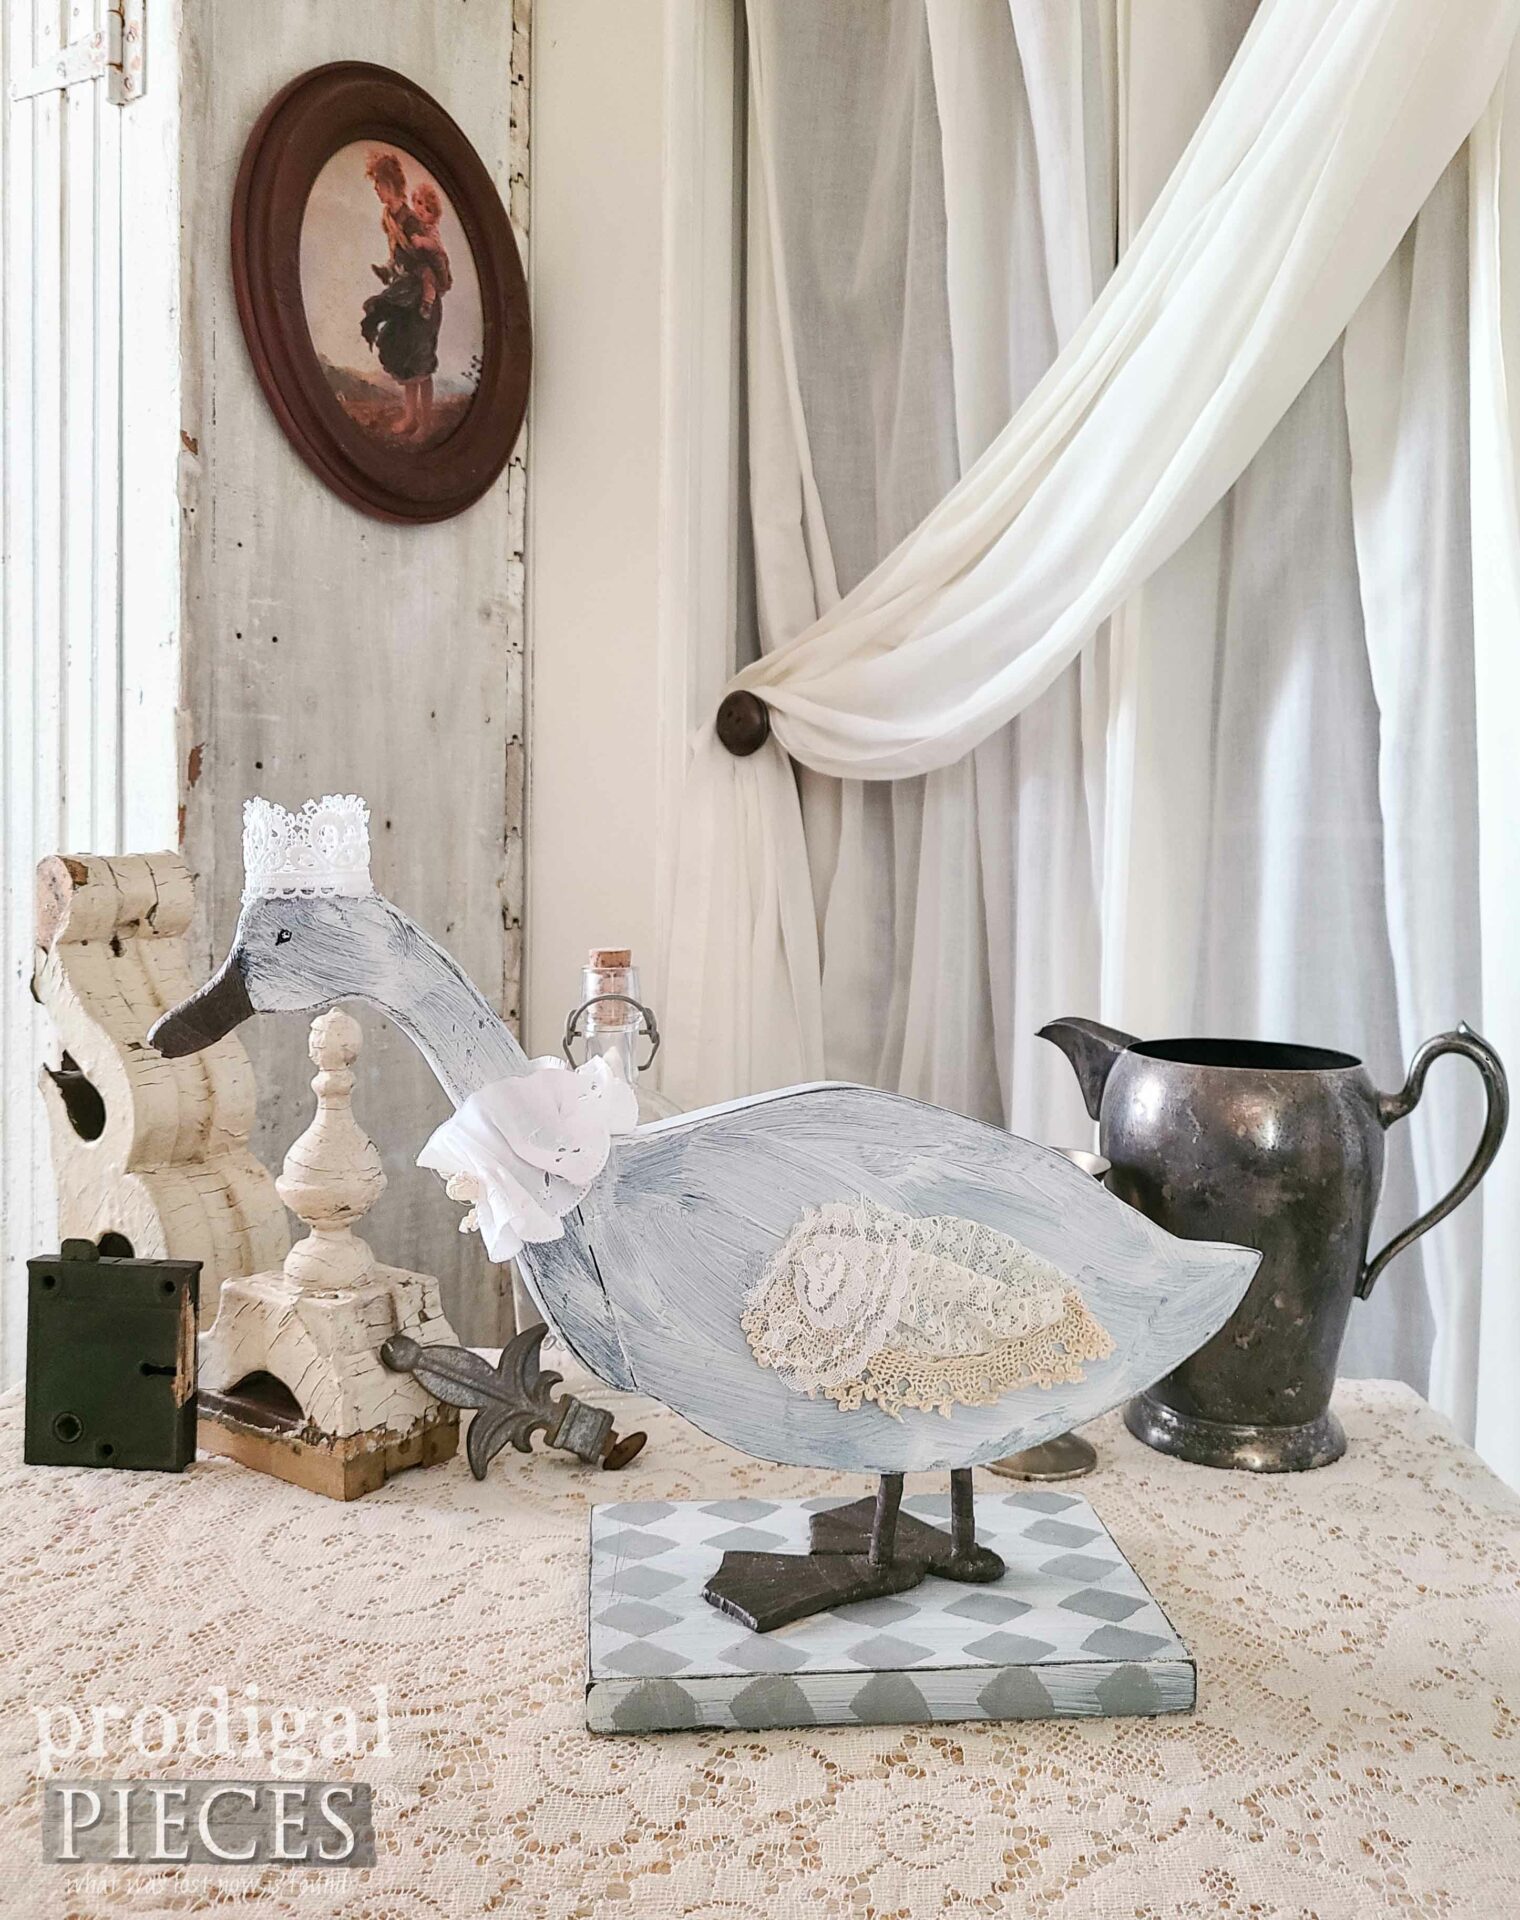 French Chic Goose State Created by Larissa of Prodigal Pieces with Upcycled Items | prodigalpieces.com #prodigalpieces #frenchchic #diy #handmade